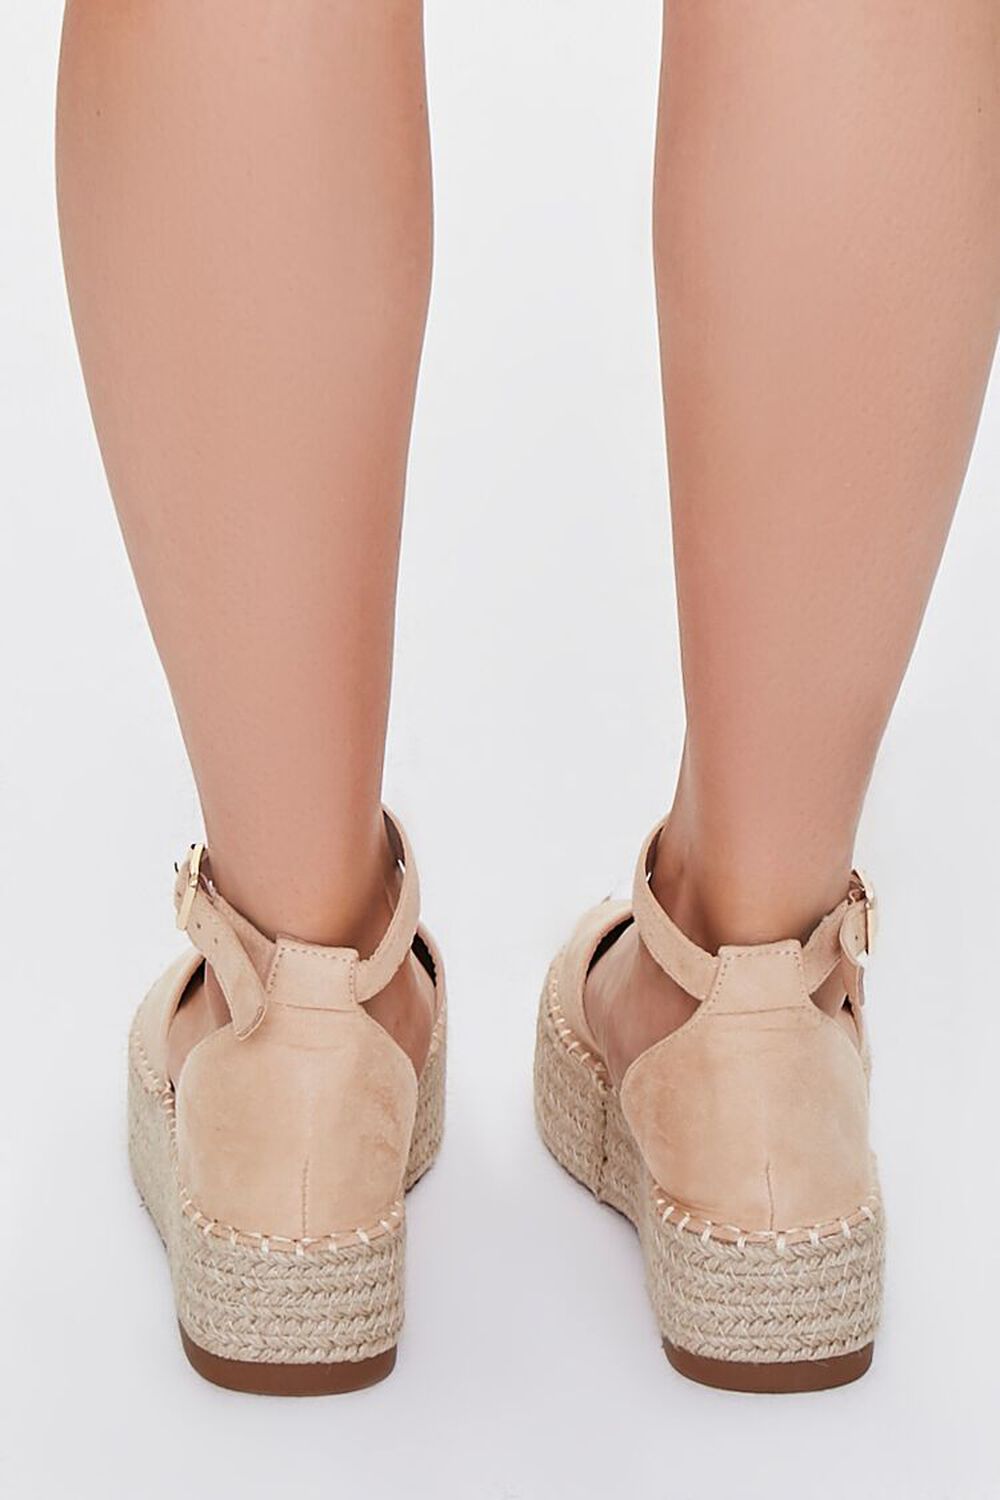 NUDE Faux Suede Espadrille Wedges, image 3